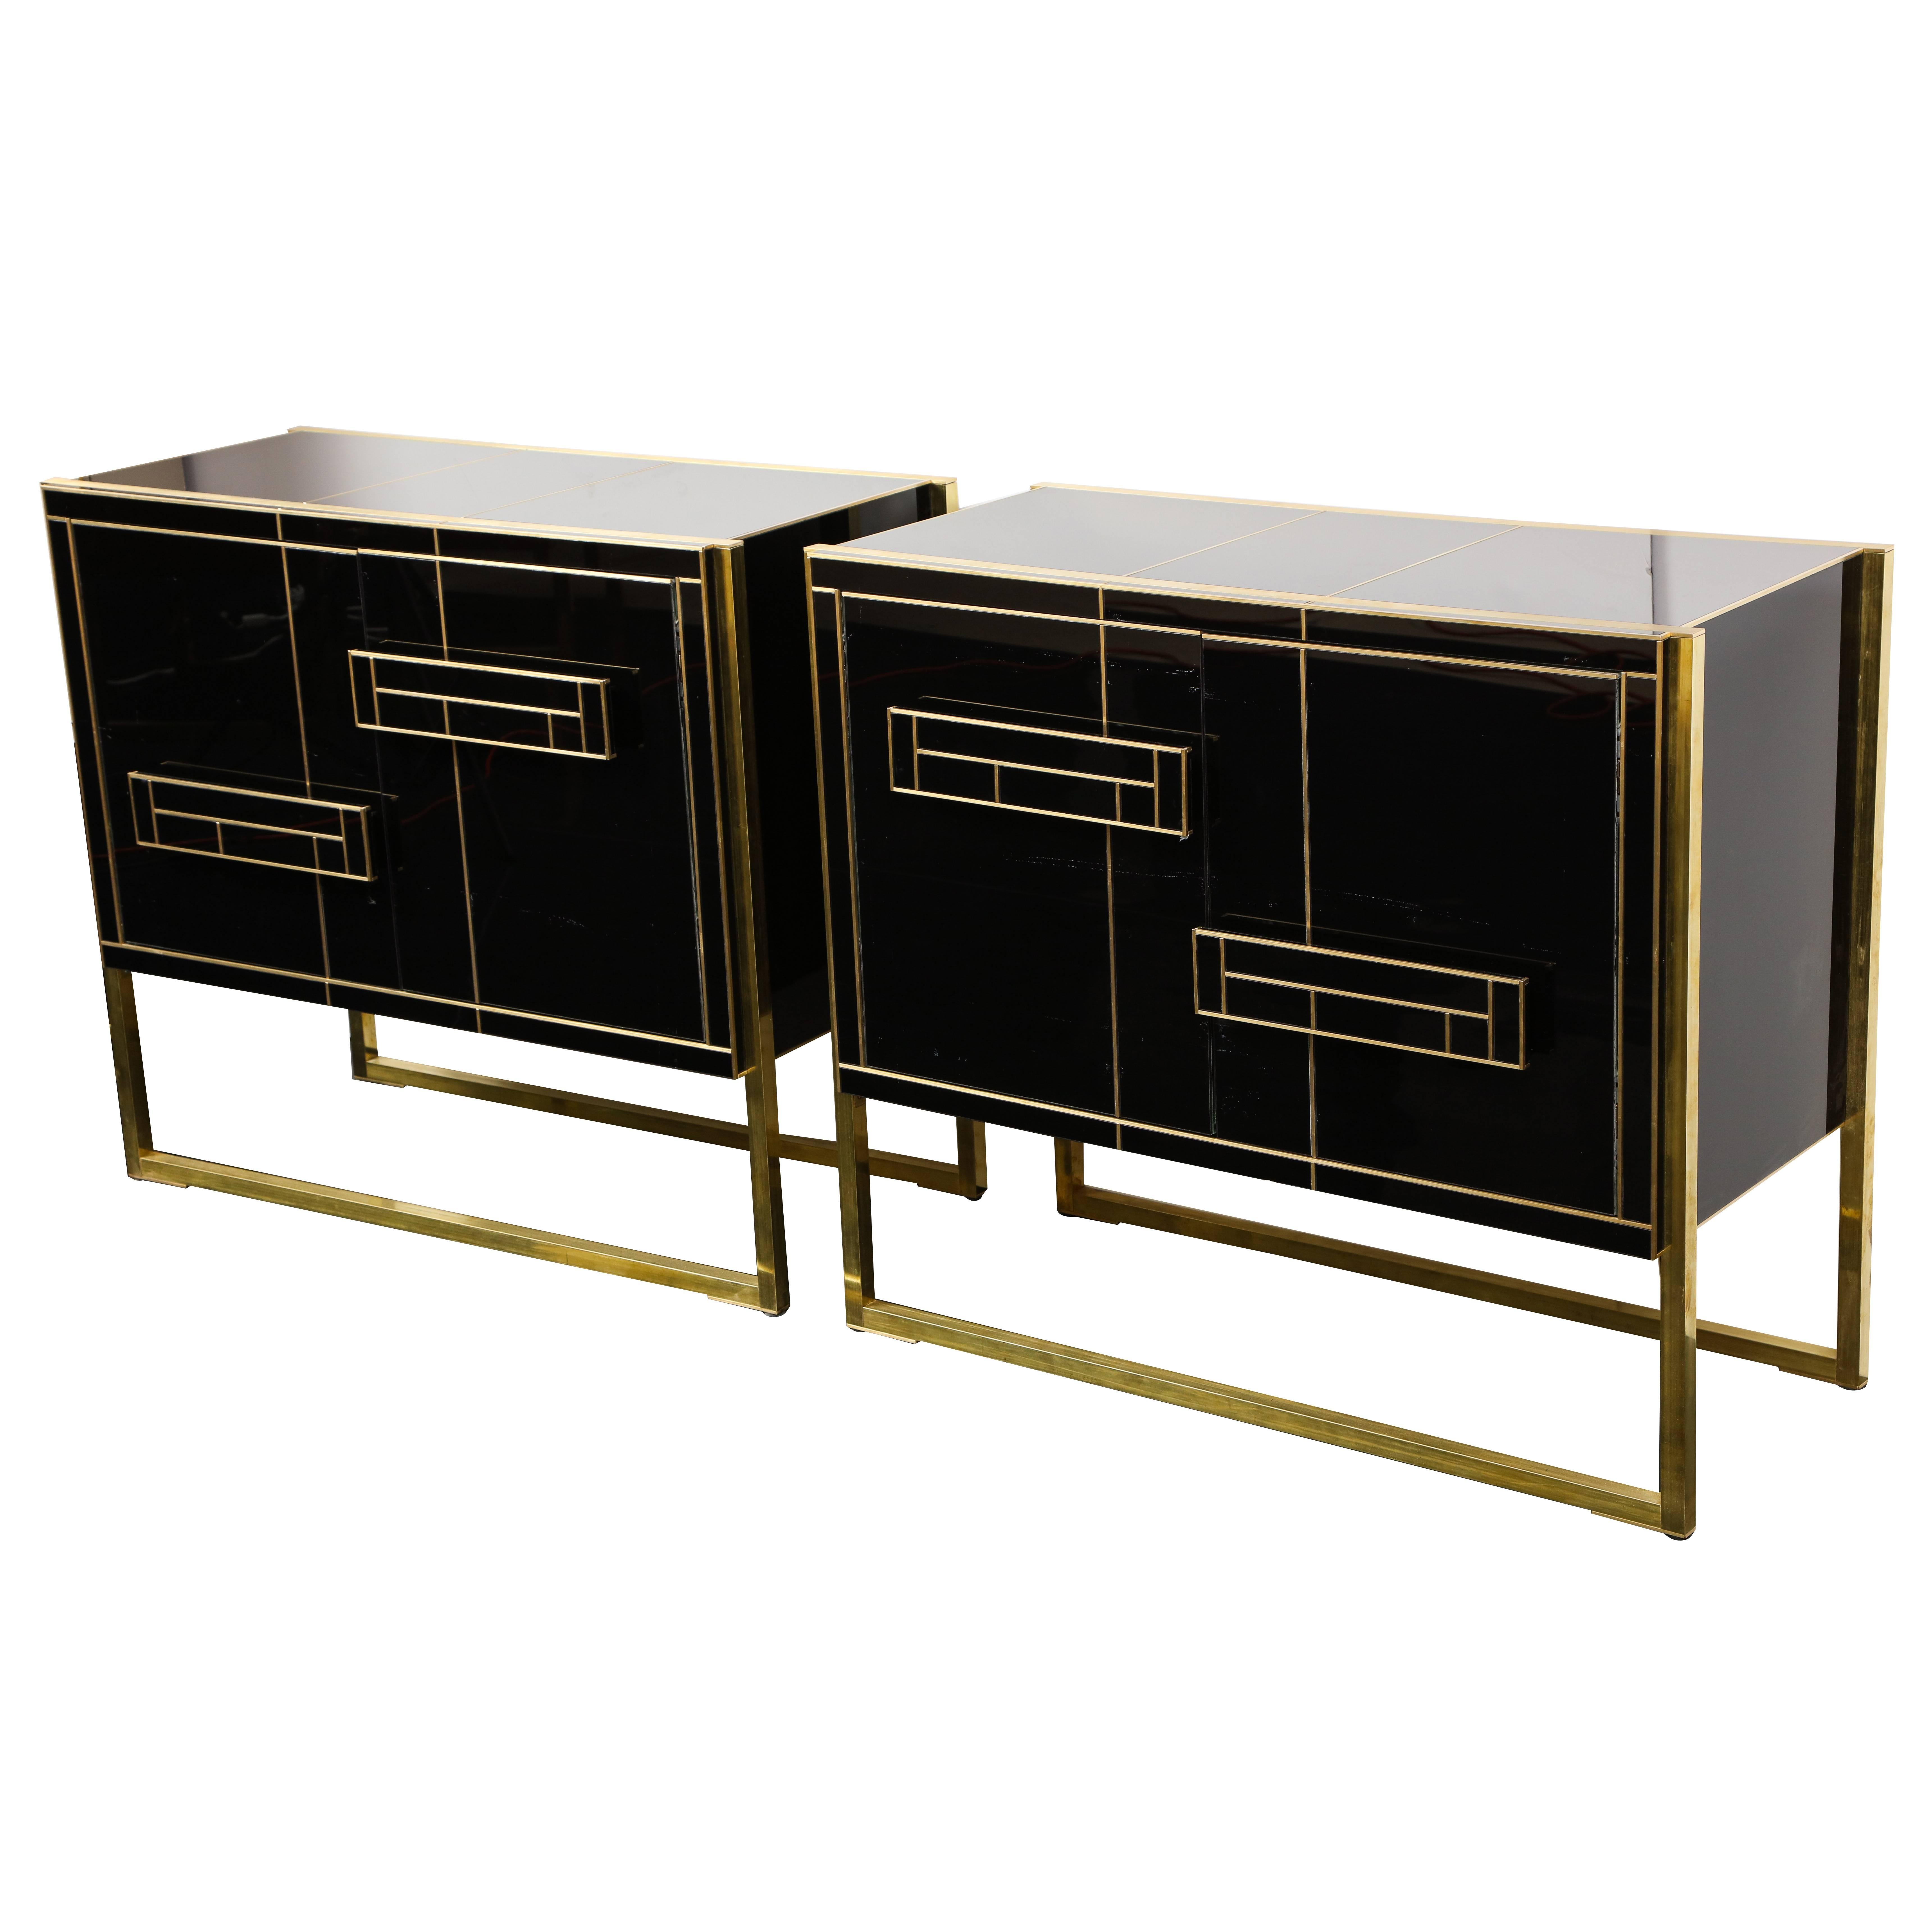 One of a Kind Signed Pair of Black Glass and Brass Cabinets